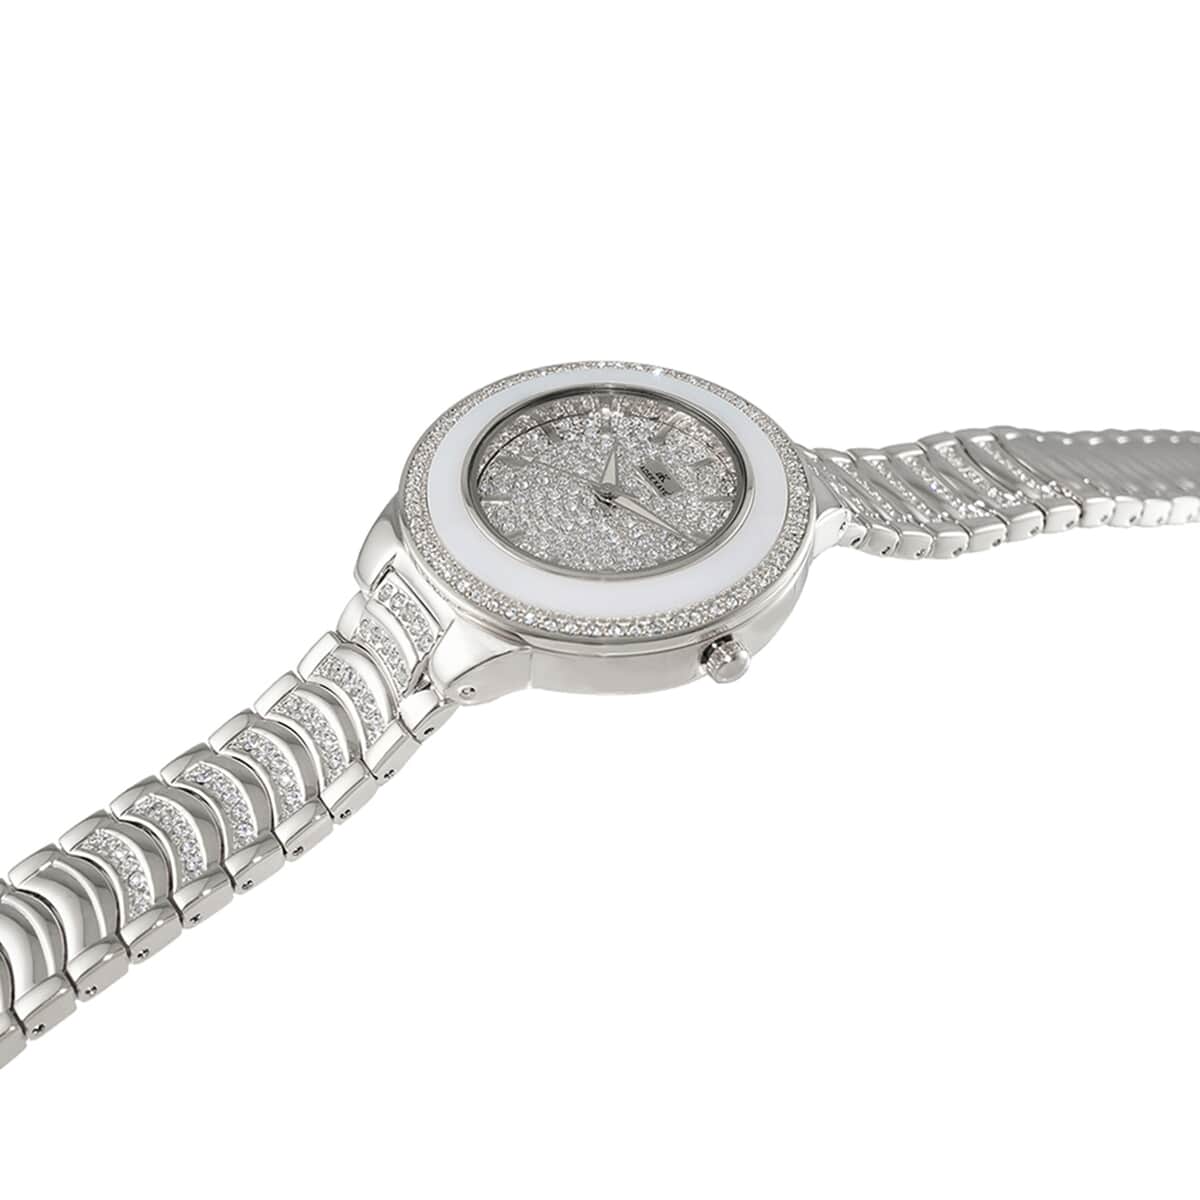 ADEE KAYE Austrian Crystal Japan Quartz Movement Watch in Stainless Steel Strap (38 mm) image number 1